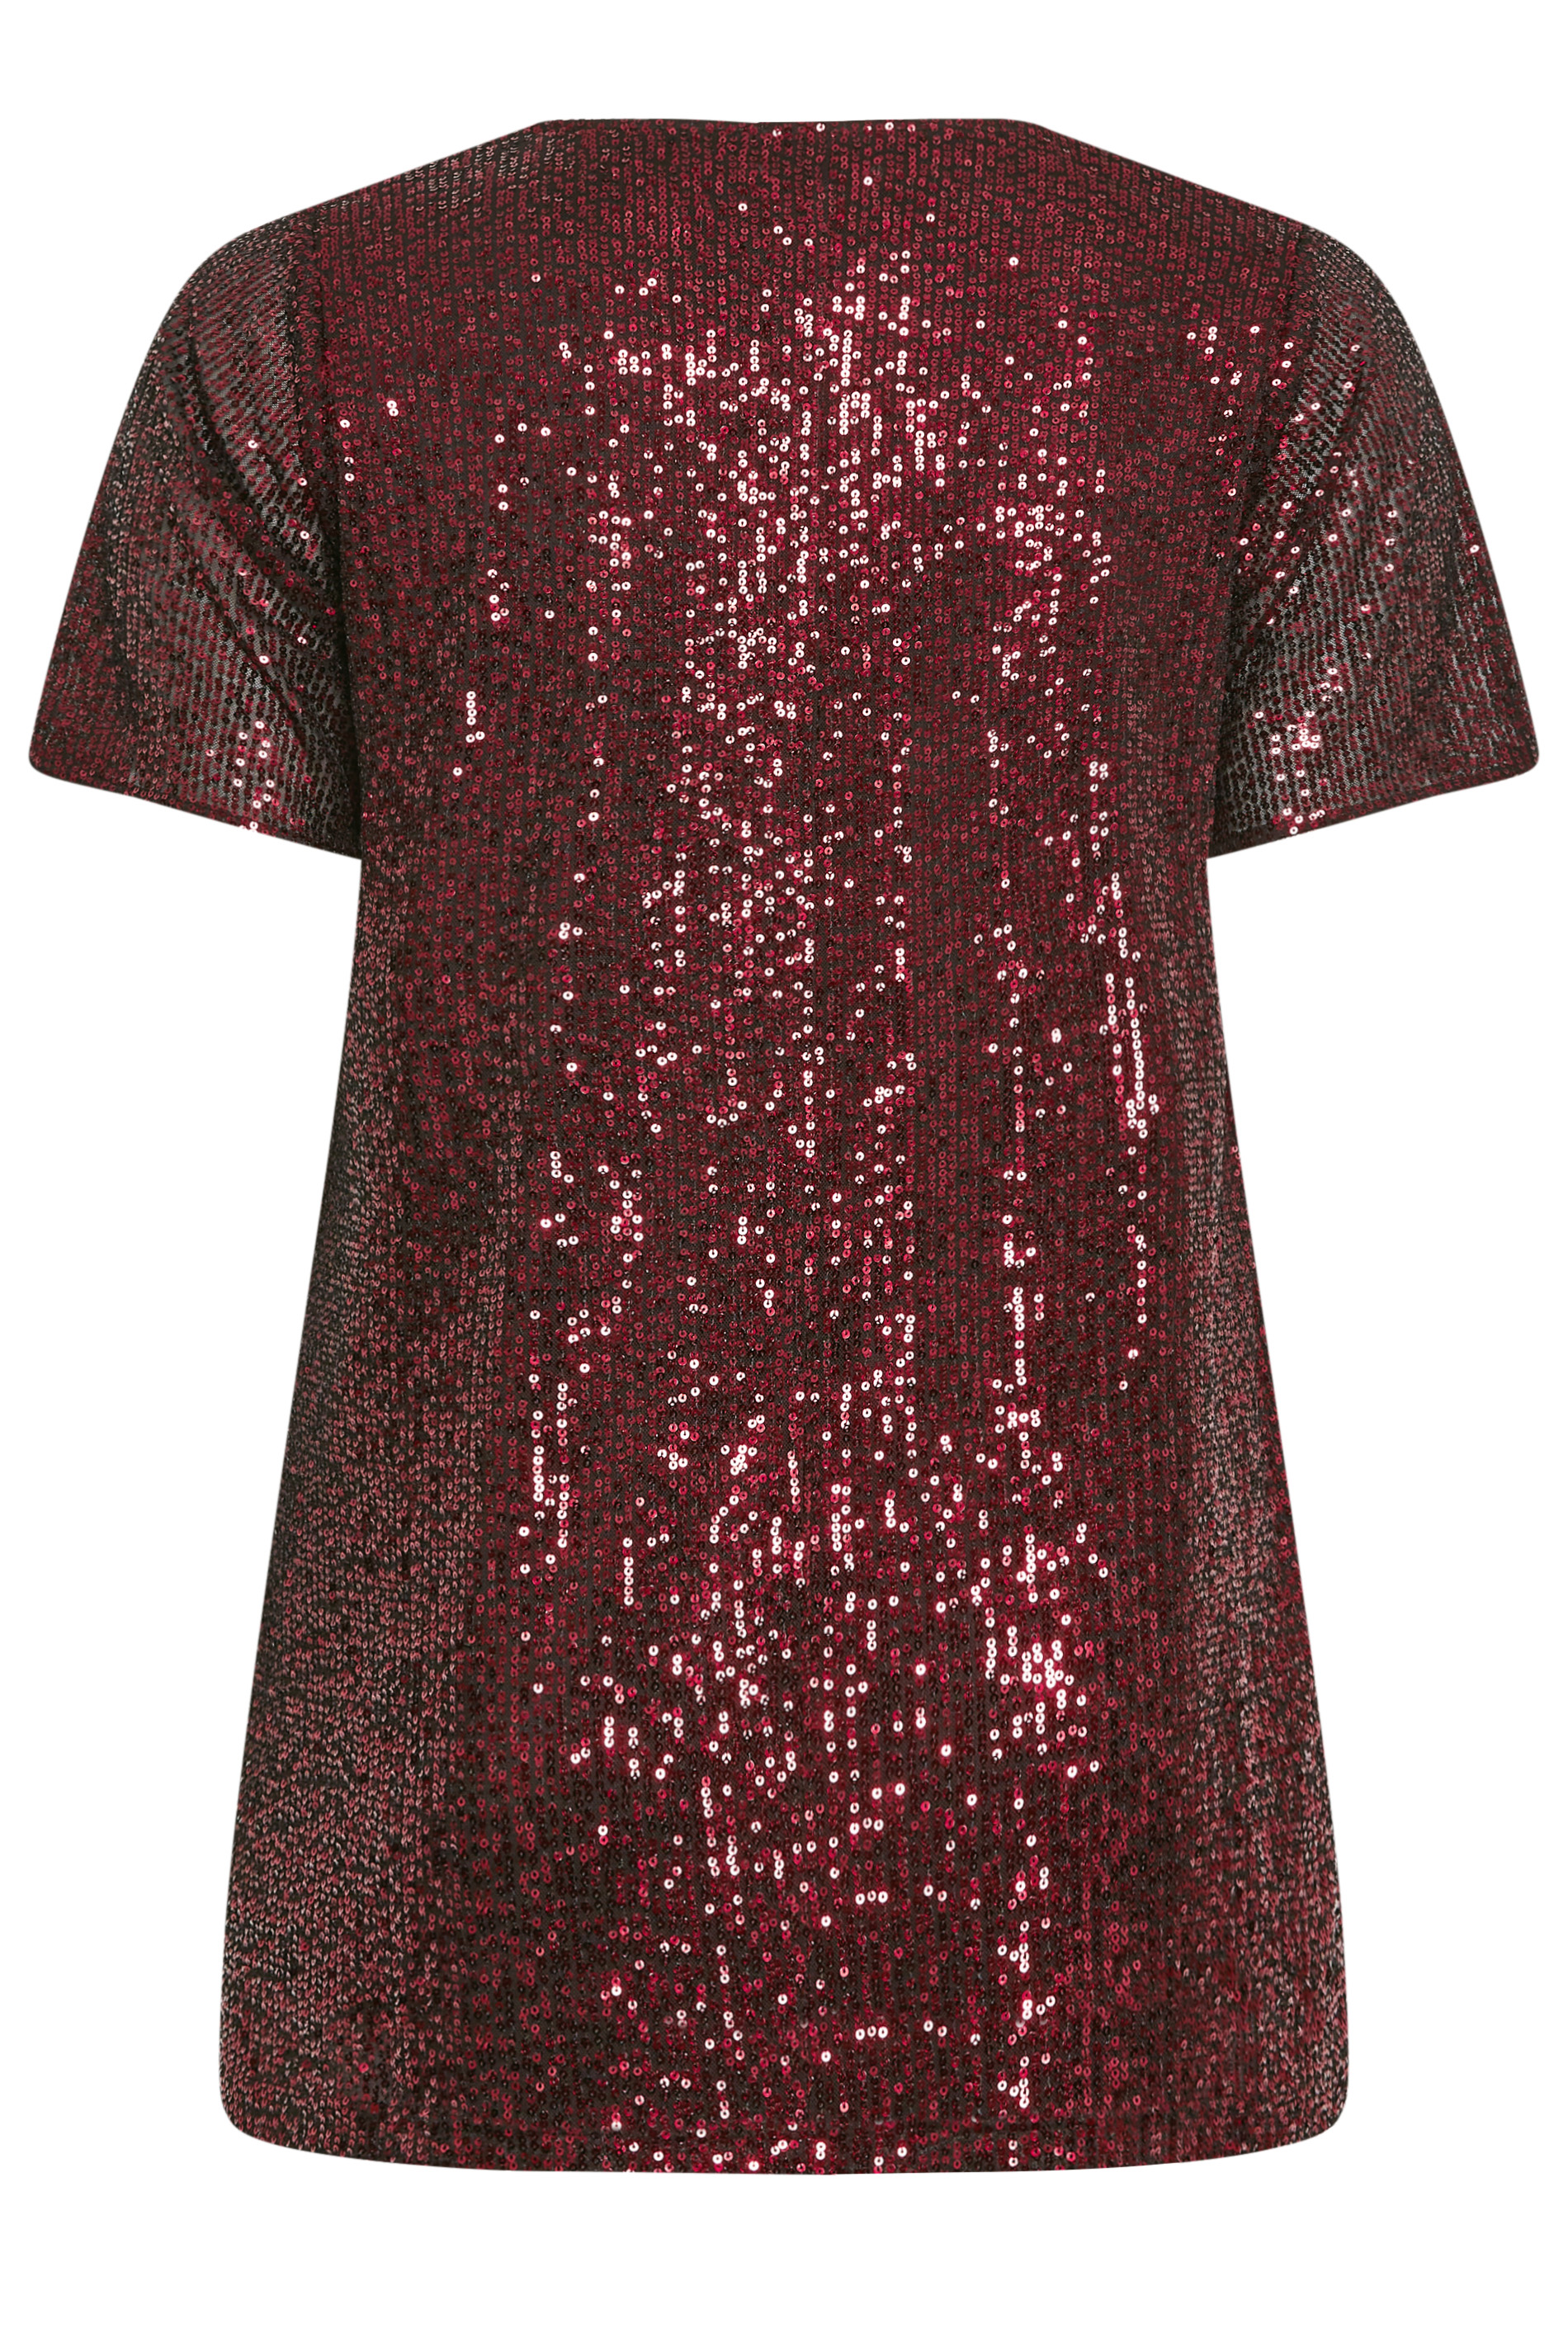 YOURS Plus Size Burgundy Red Lace Sequin Embellished Swing Dress